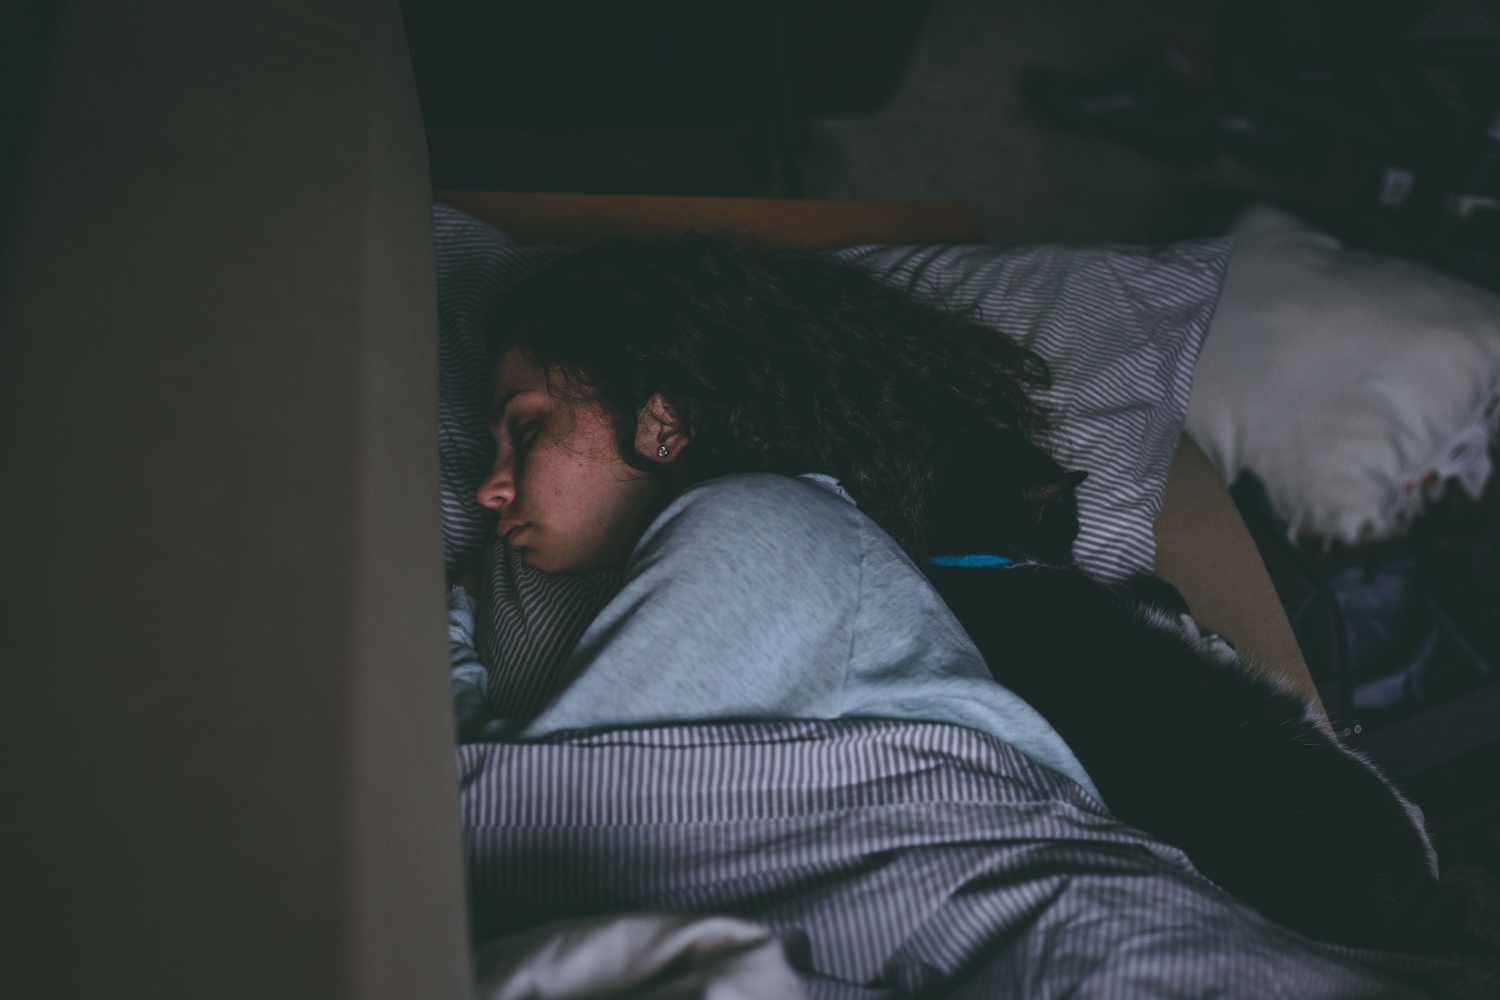 Why Sleeping In On The Weekend Could Be Bad For You (Image)